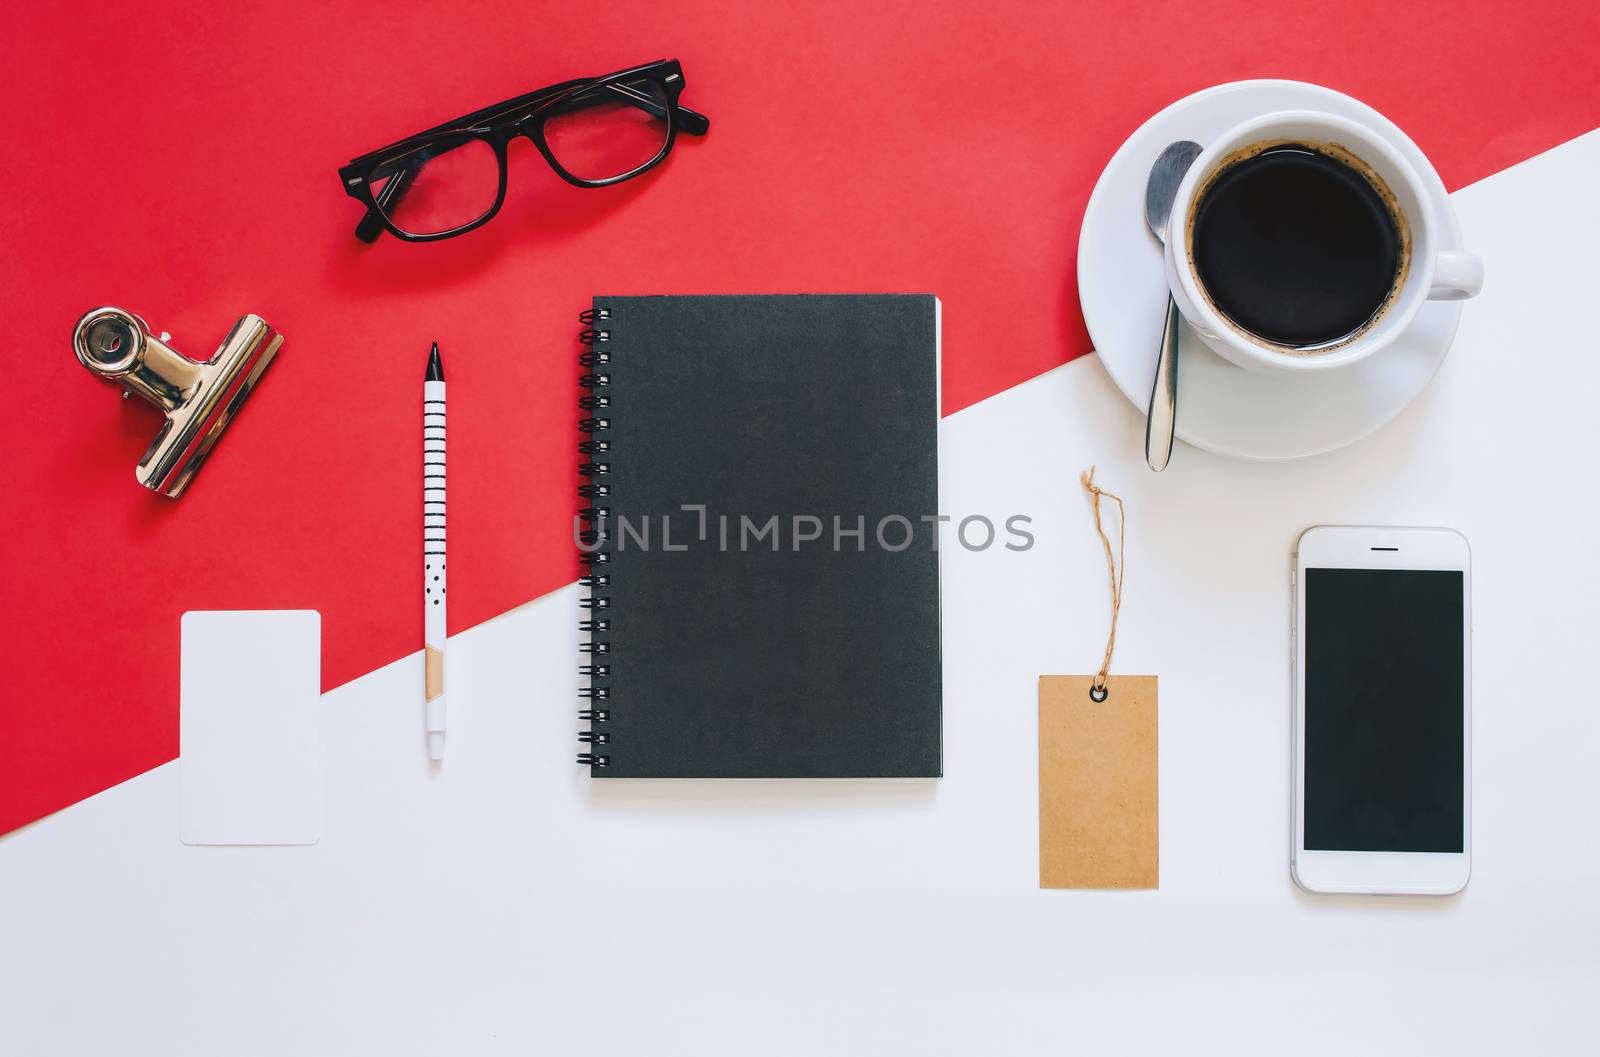 Creative flat lay photo of workspace desk with smartphone, eyeglasses, coffee, tag and notebook with copy space background, minimal styled
